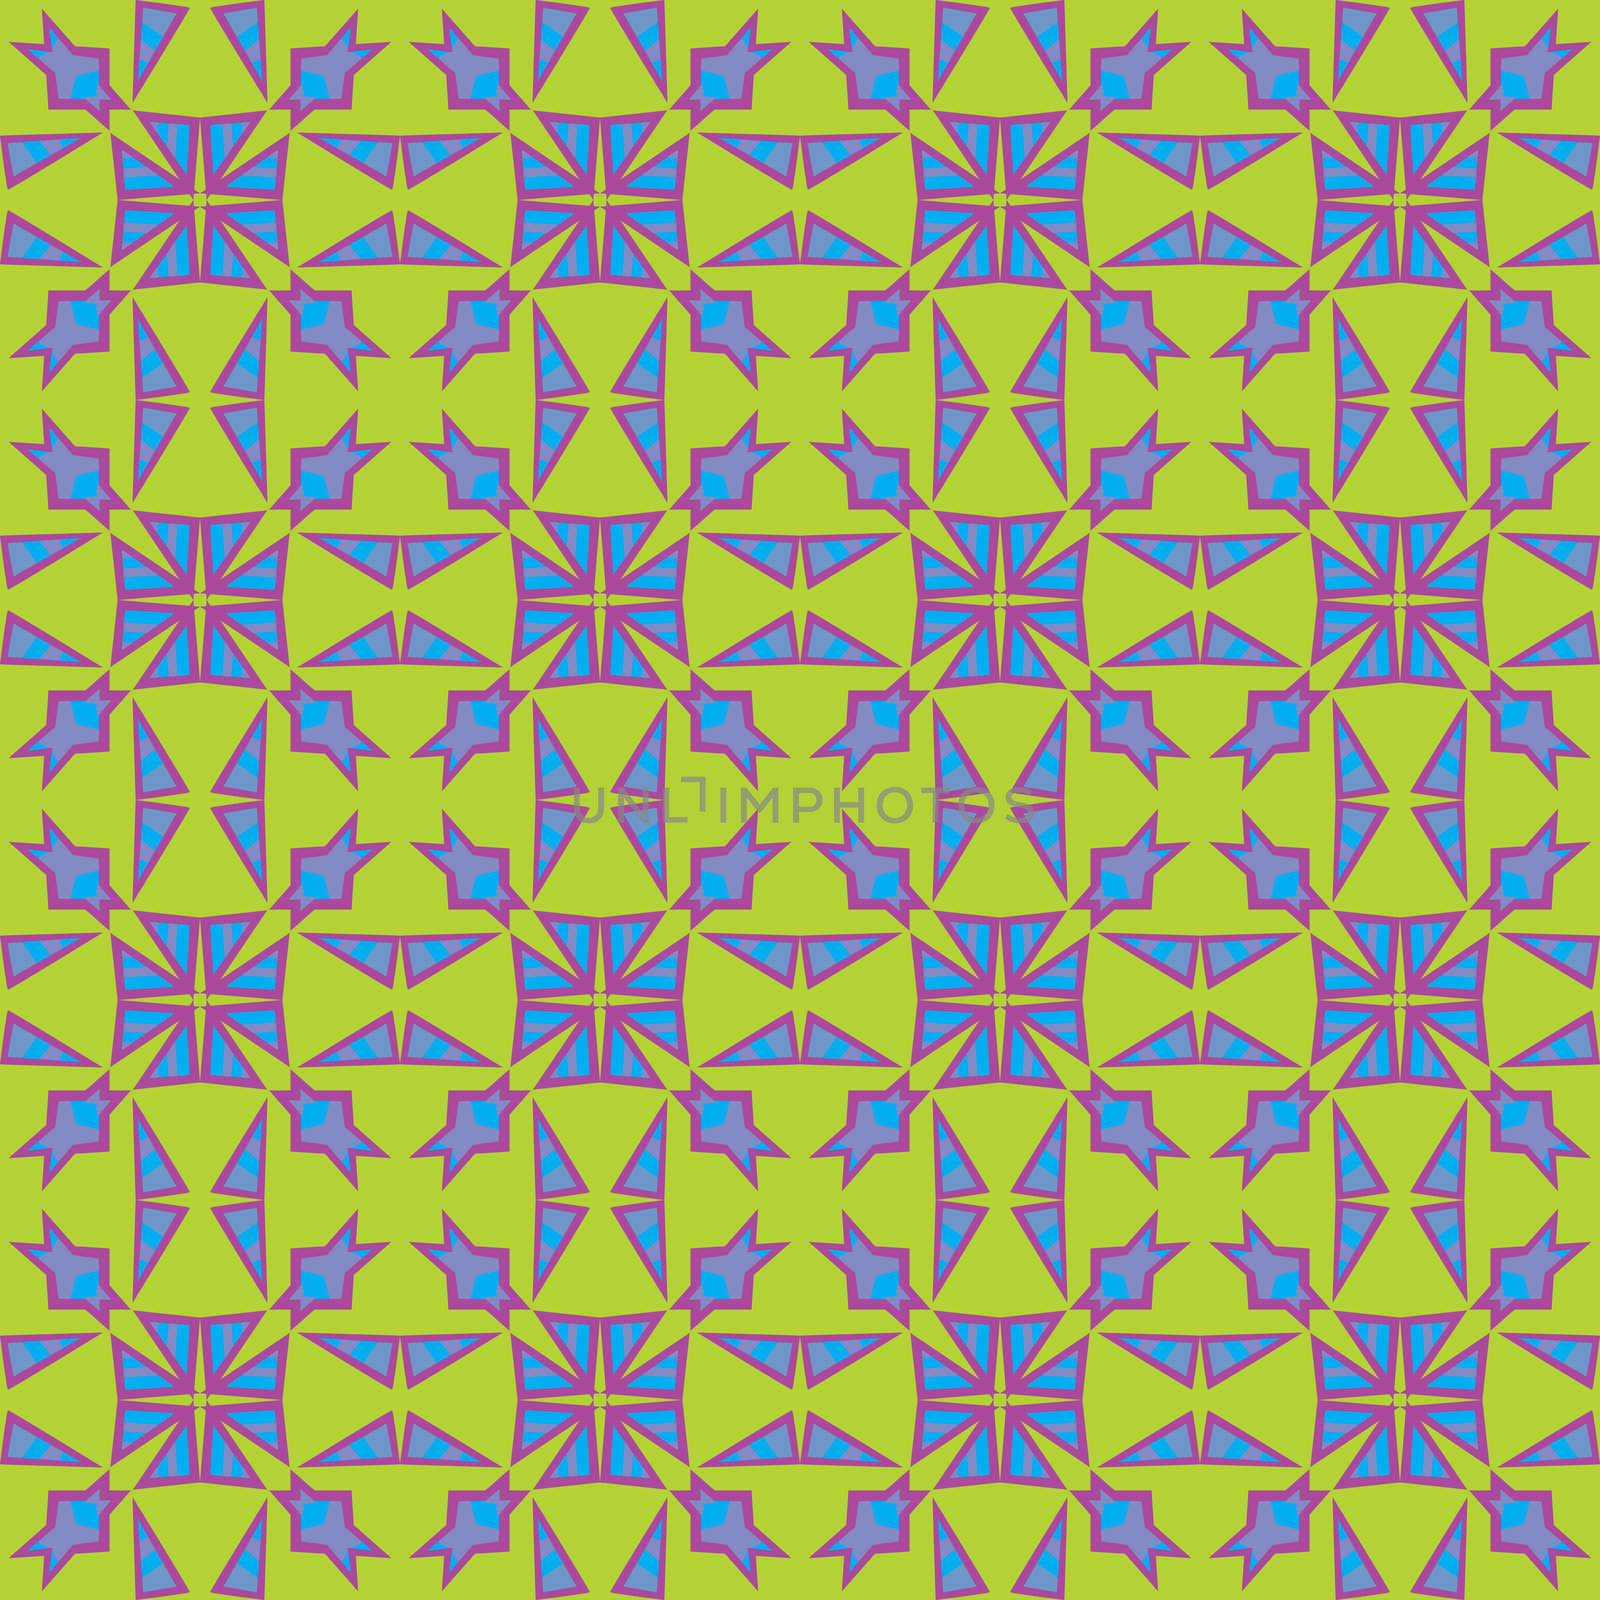 Colliding triangles in blue and purple in a seamless wallpaper pattern